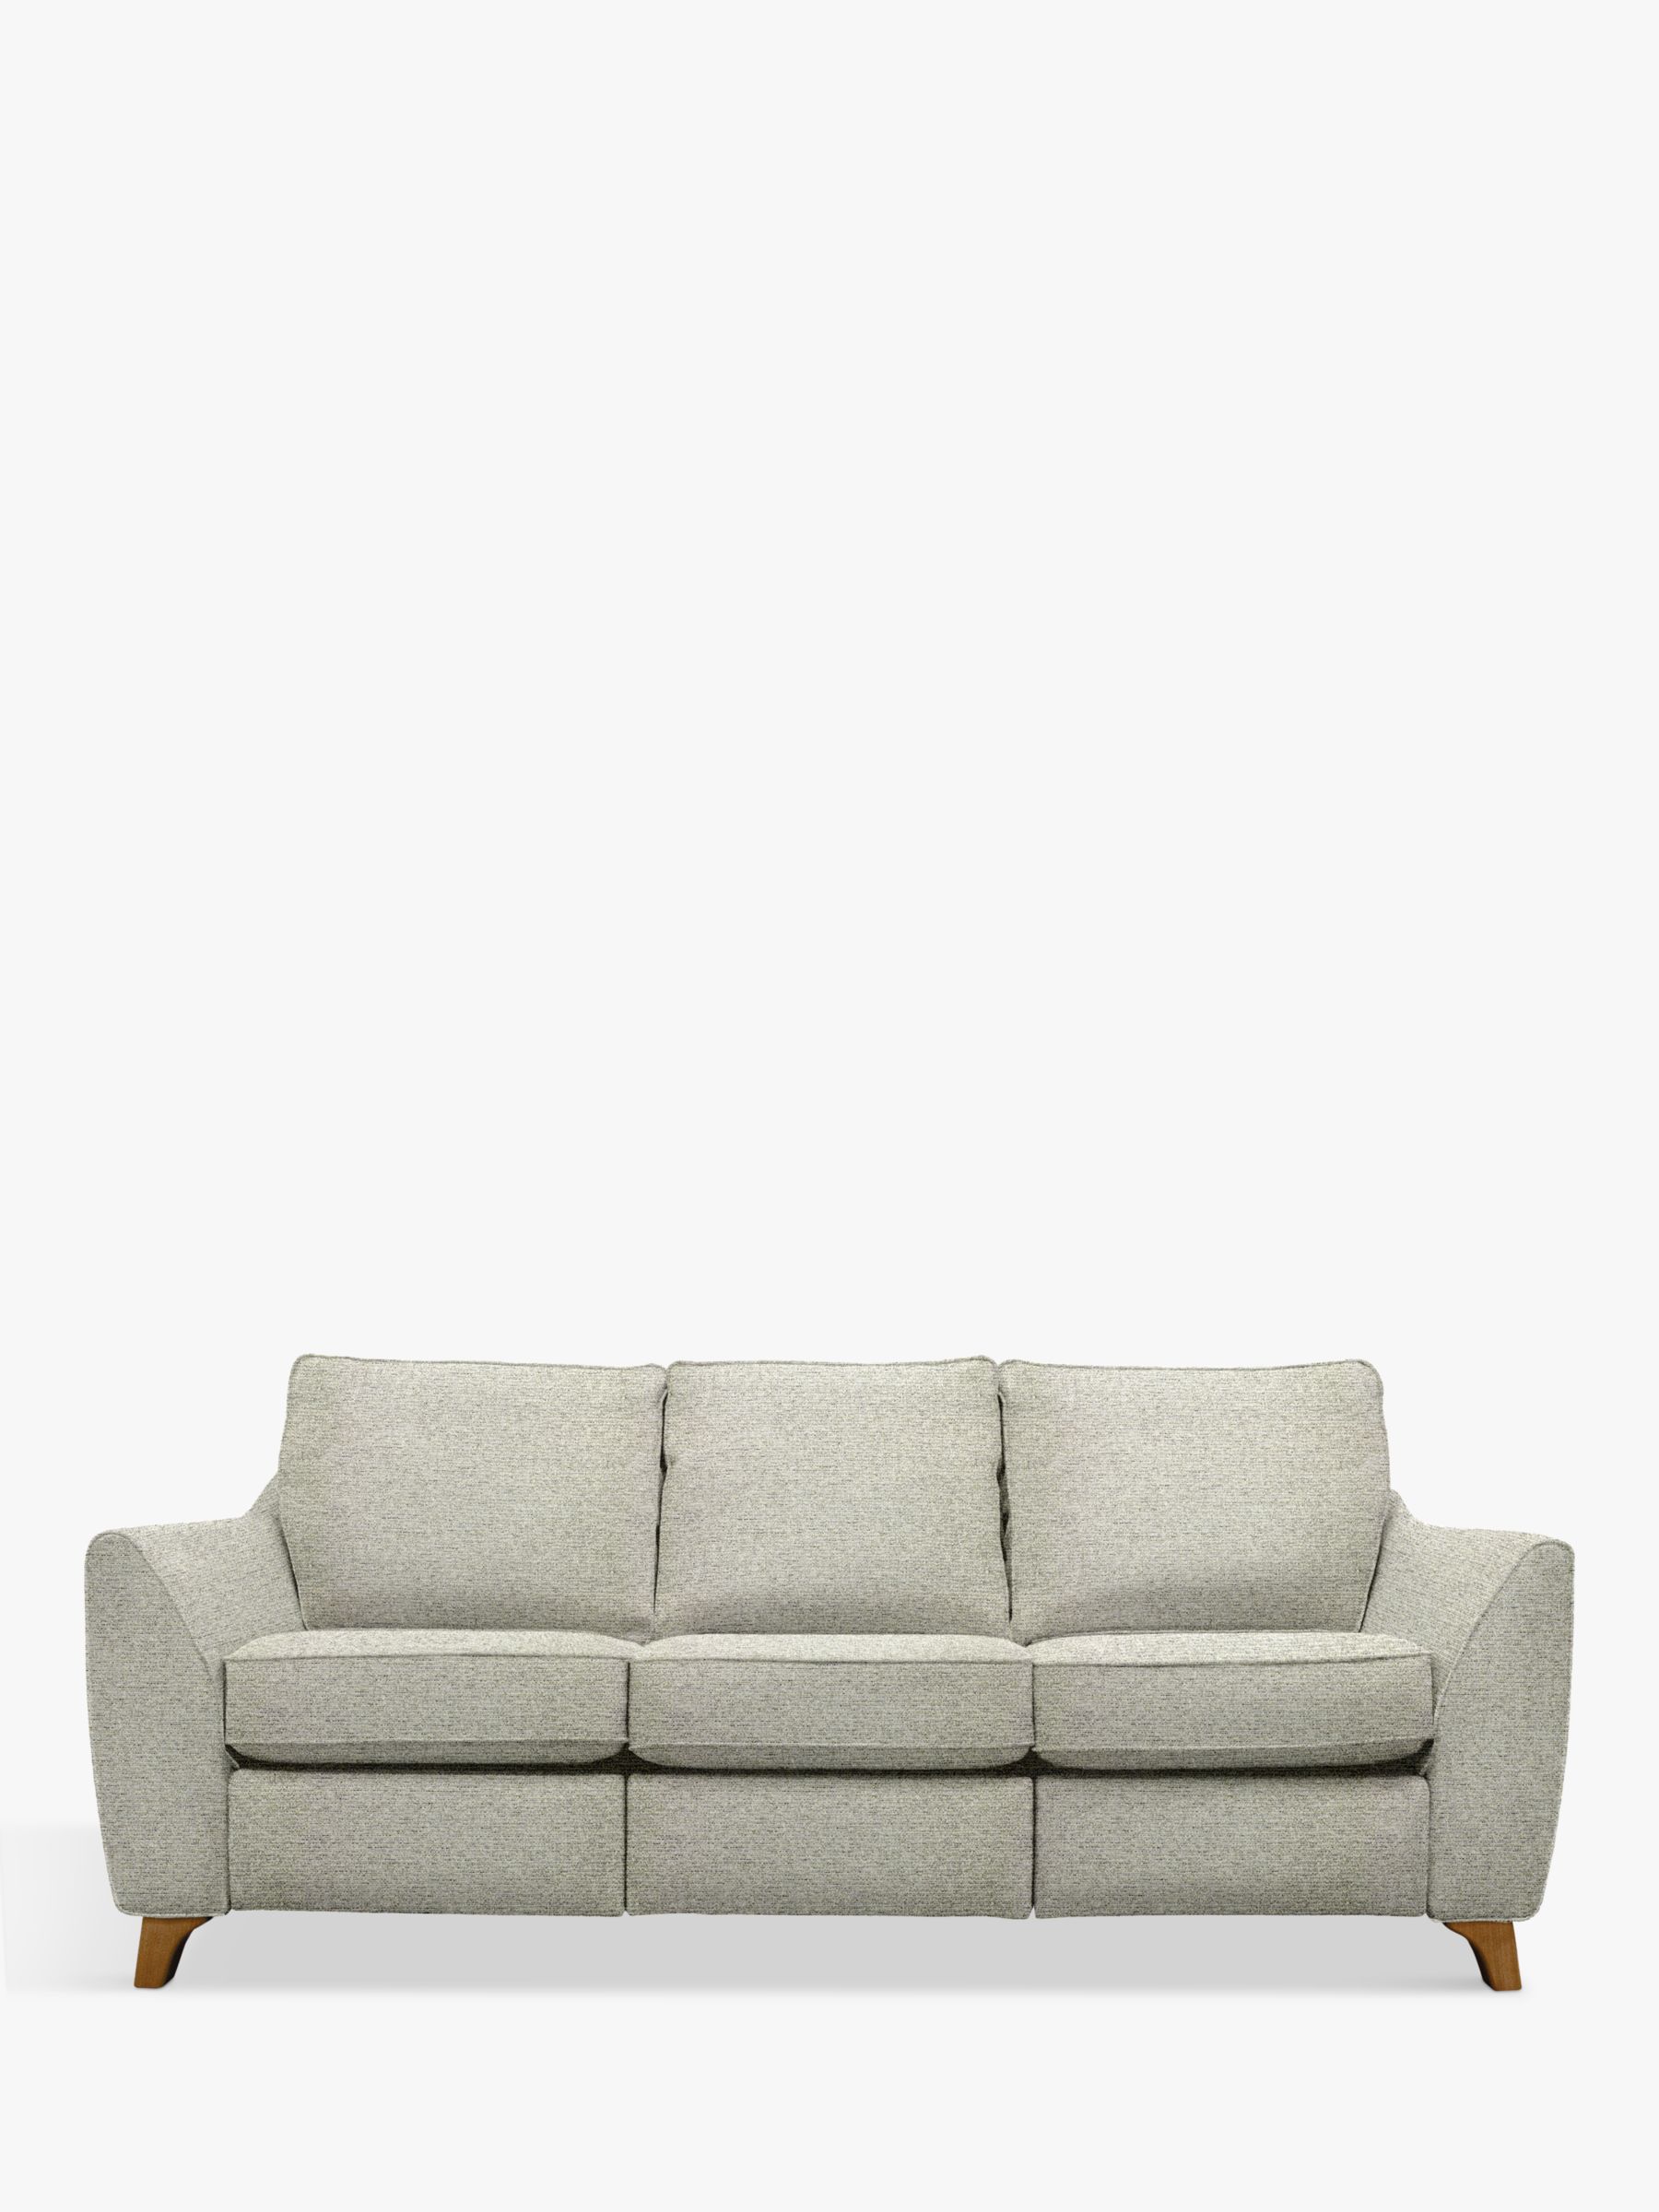 Photo of G plan vintage the sixty eight large 3 seater sofa with footrest mechanism